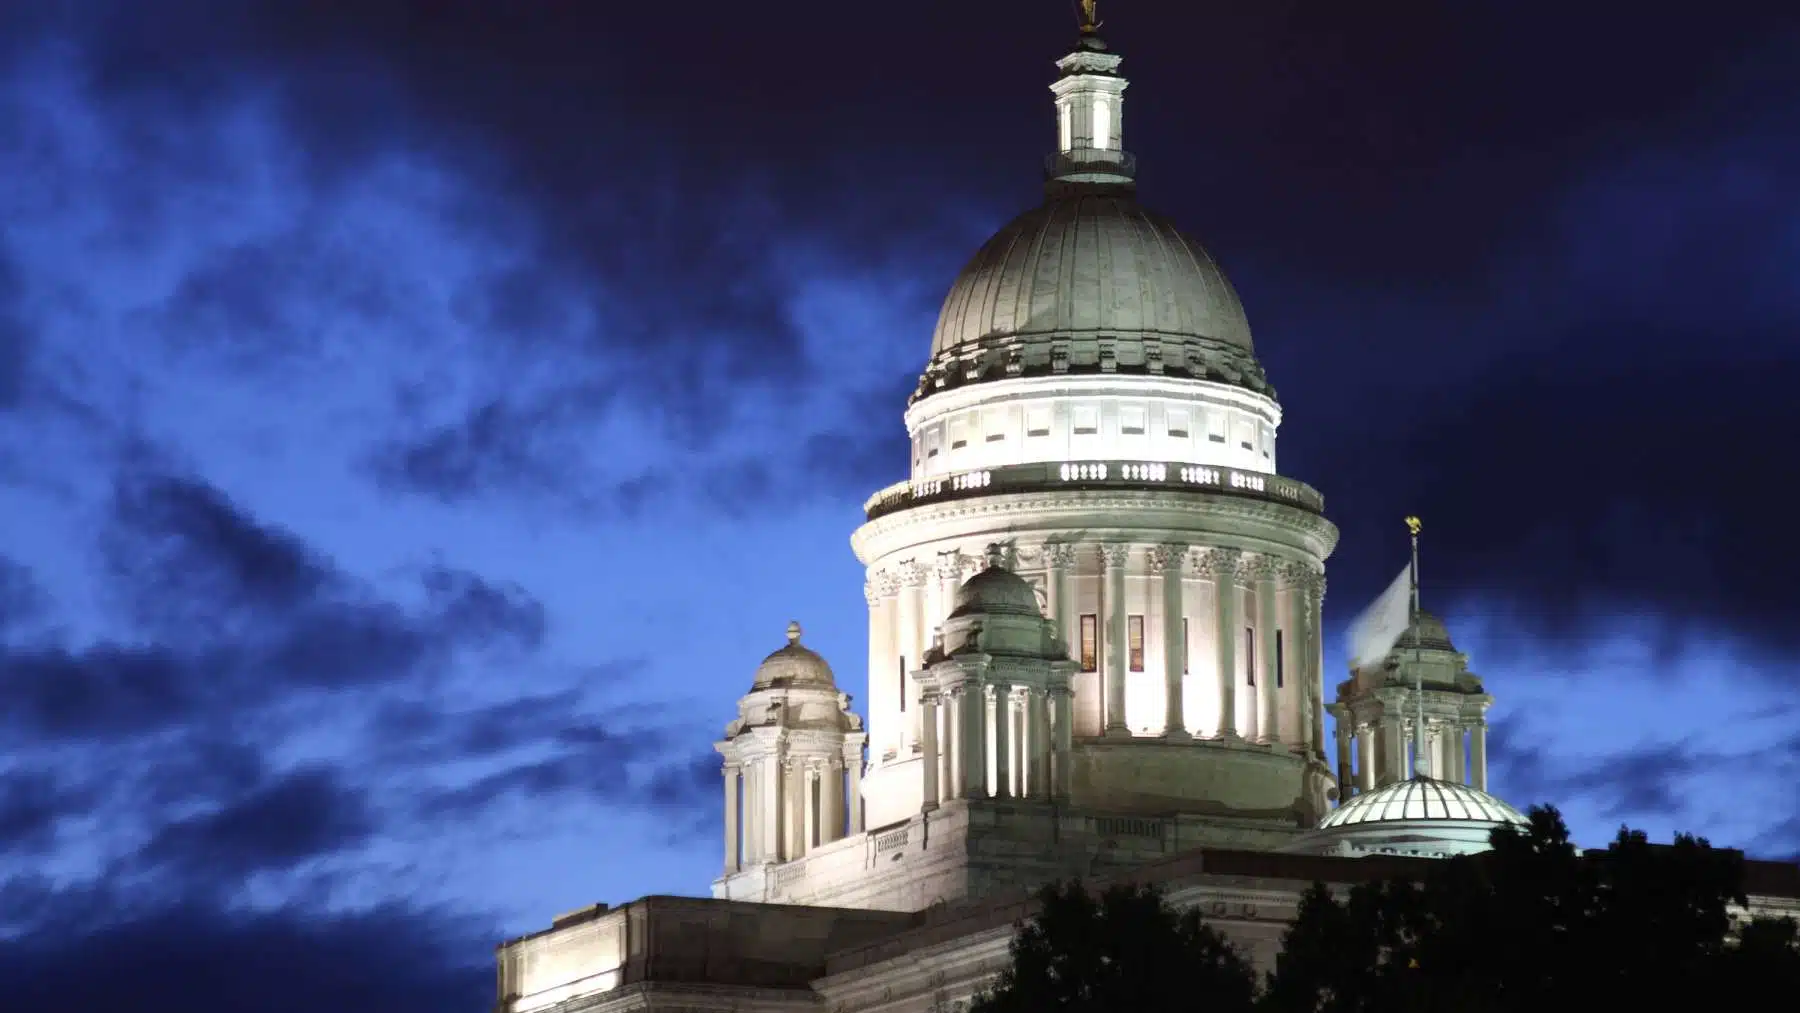 EPI’s Candidate Briefing Book will help you understand and act on poverty, equity and economic opportunity in Rhode Island